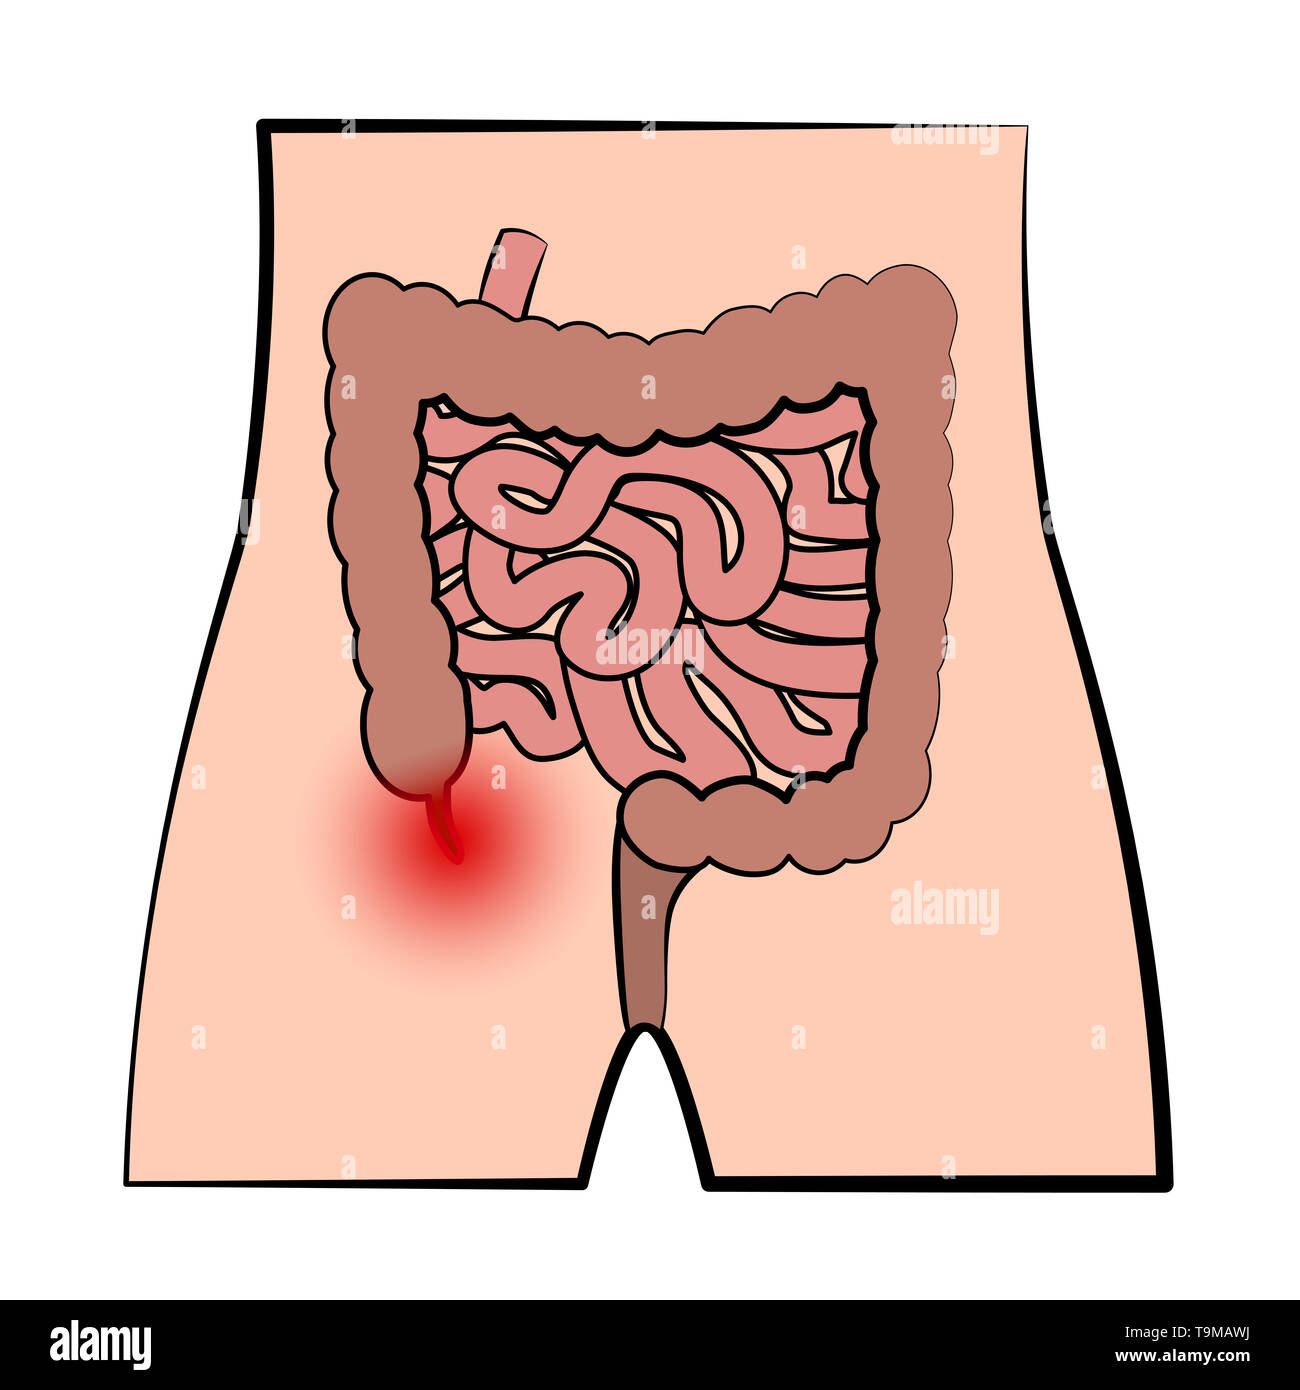 Inflamed appendix. Schematic illustration of appendicitis and the digestive system on white background. Stock Photo